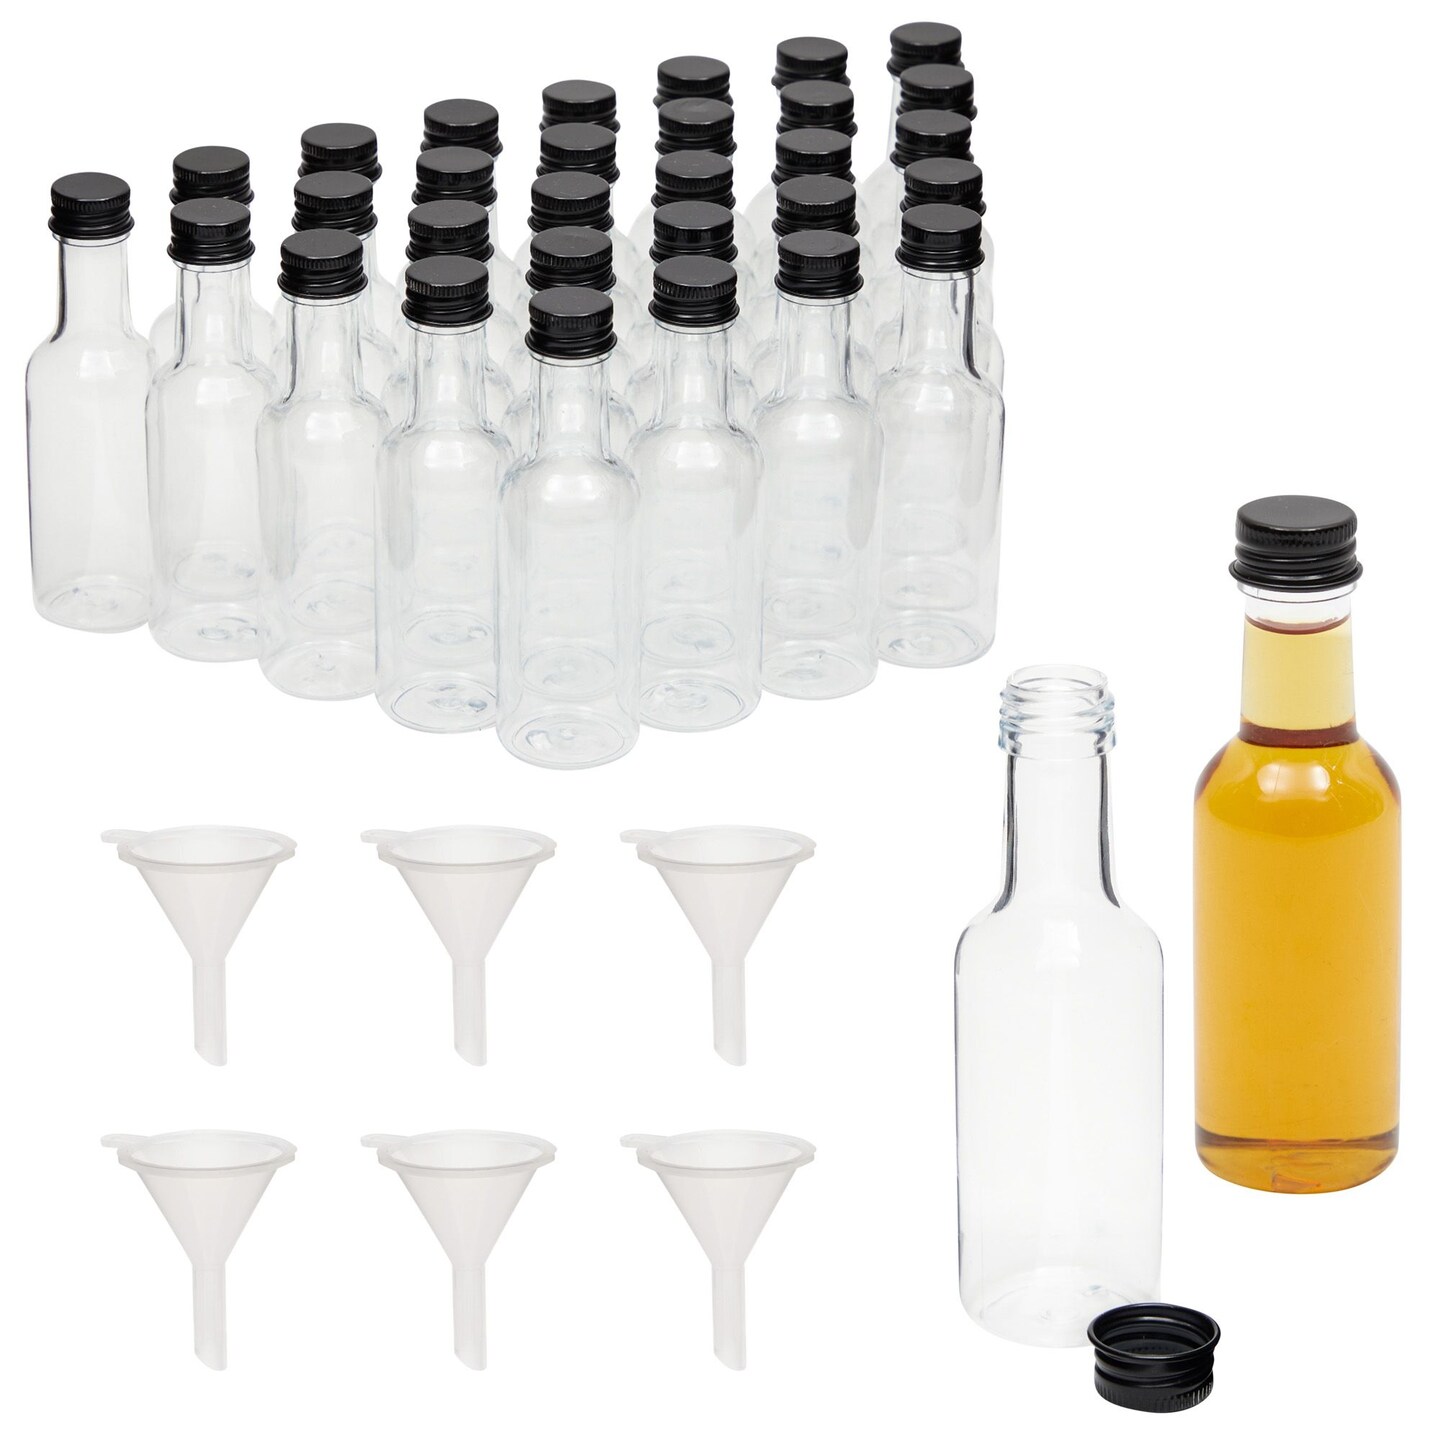 30 Pack 50ml Mini Liquor Bottles with Caps - 1.7 oz Small Wine Bottle with 6 Funnels for Party Favors, Alcohol